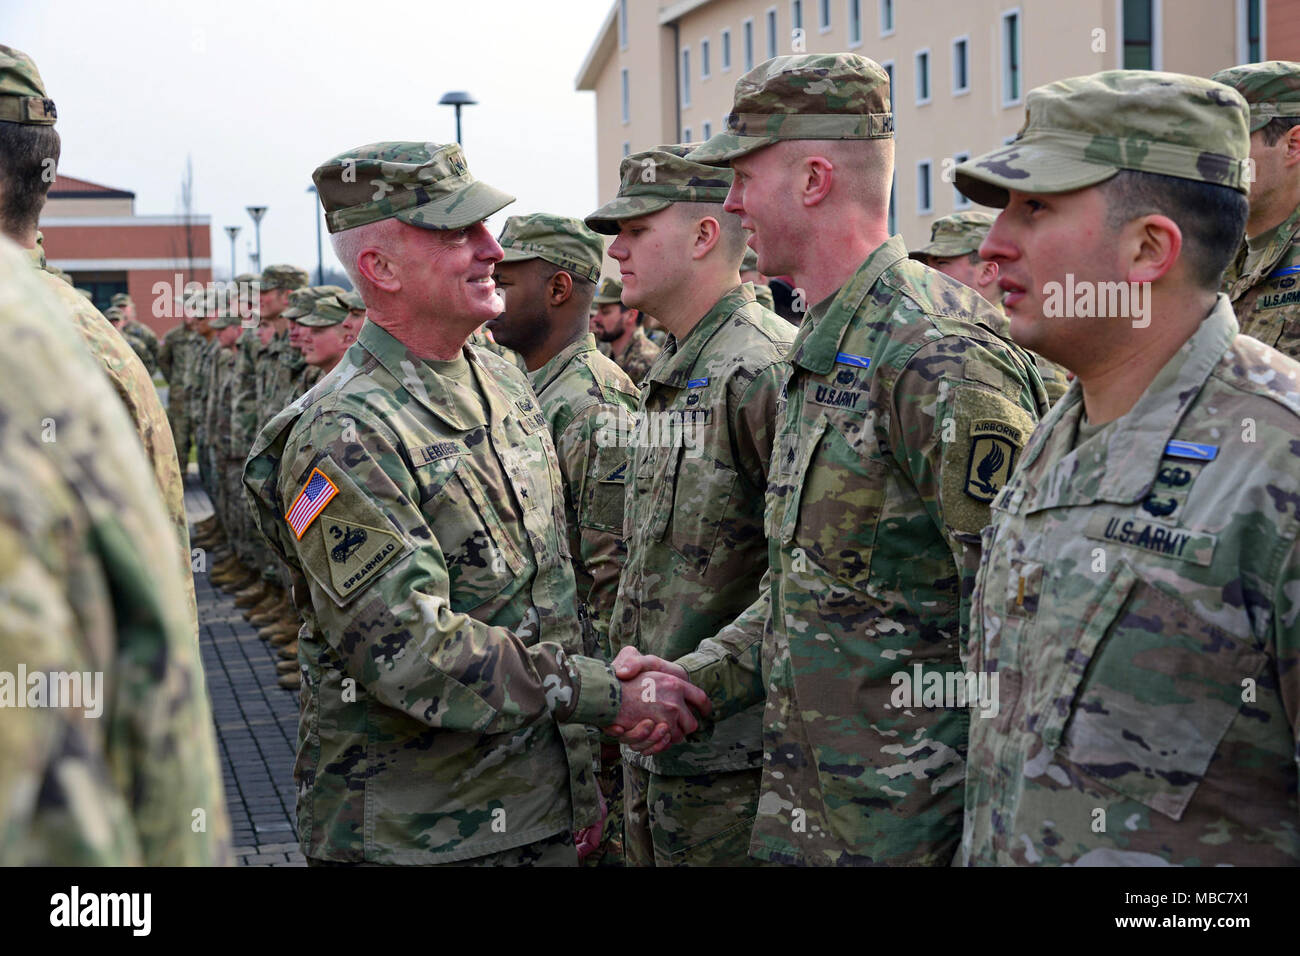 Brig. Gen. Eugene J. LeBoeuf, Commander, U.S. Army Africa (left), congratulates a U.S. Army Paratrooper assigned to the 173rd Airborne Brigade during the Expert Infantryman Badge (EIB) ceremony at Caserma Del Din, Vicenza, Italy, 15 Feb. 2018. (U.S. Army Stock Photo